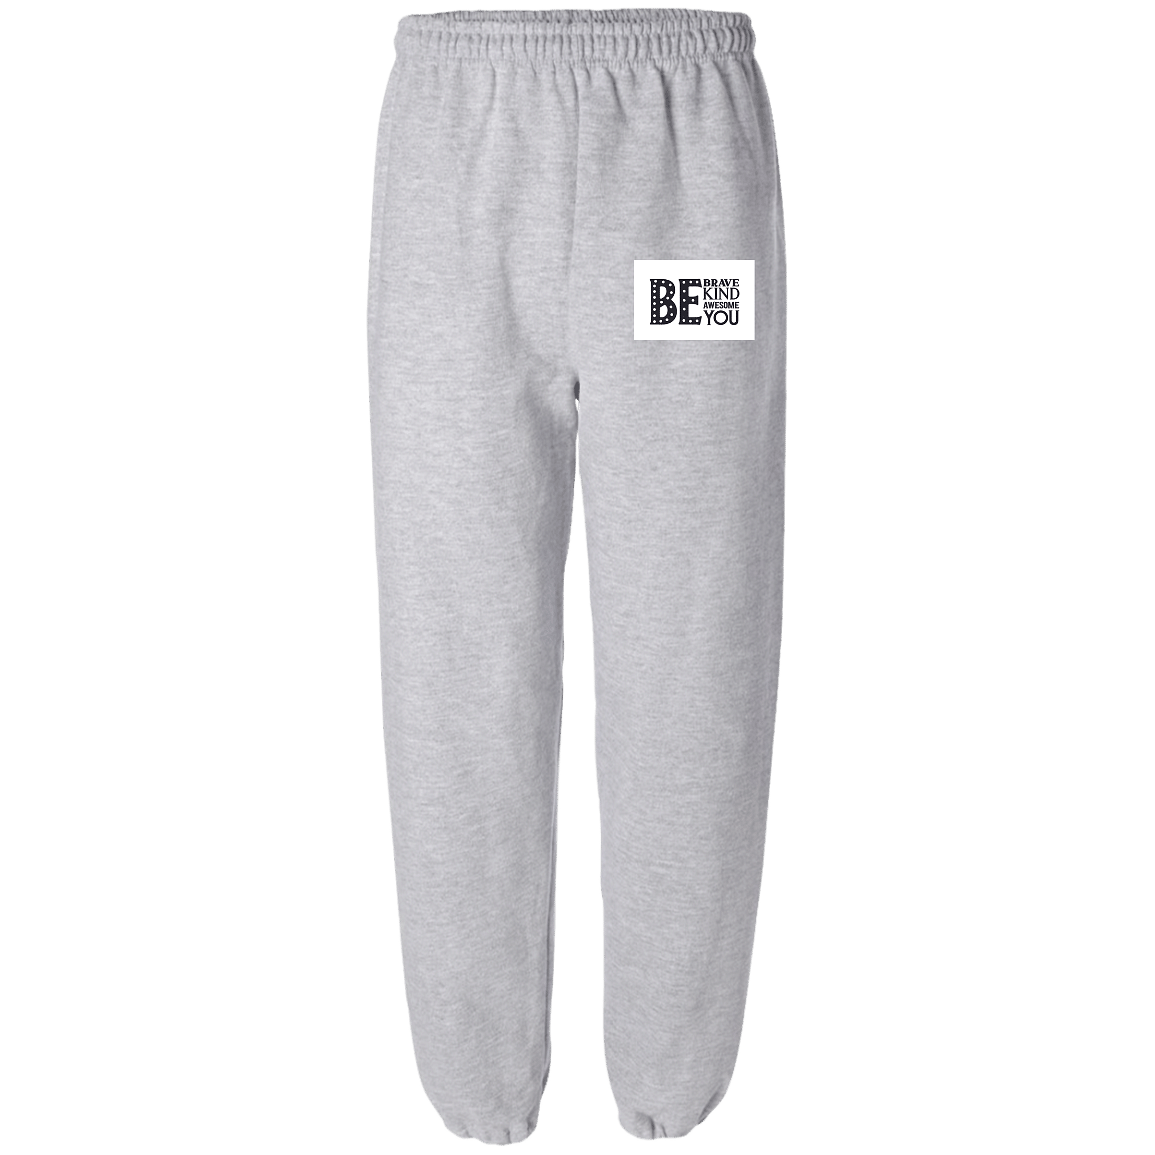 G182 Fleece Sweatpant without Pockets